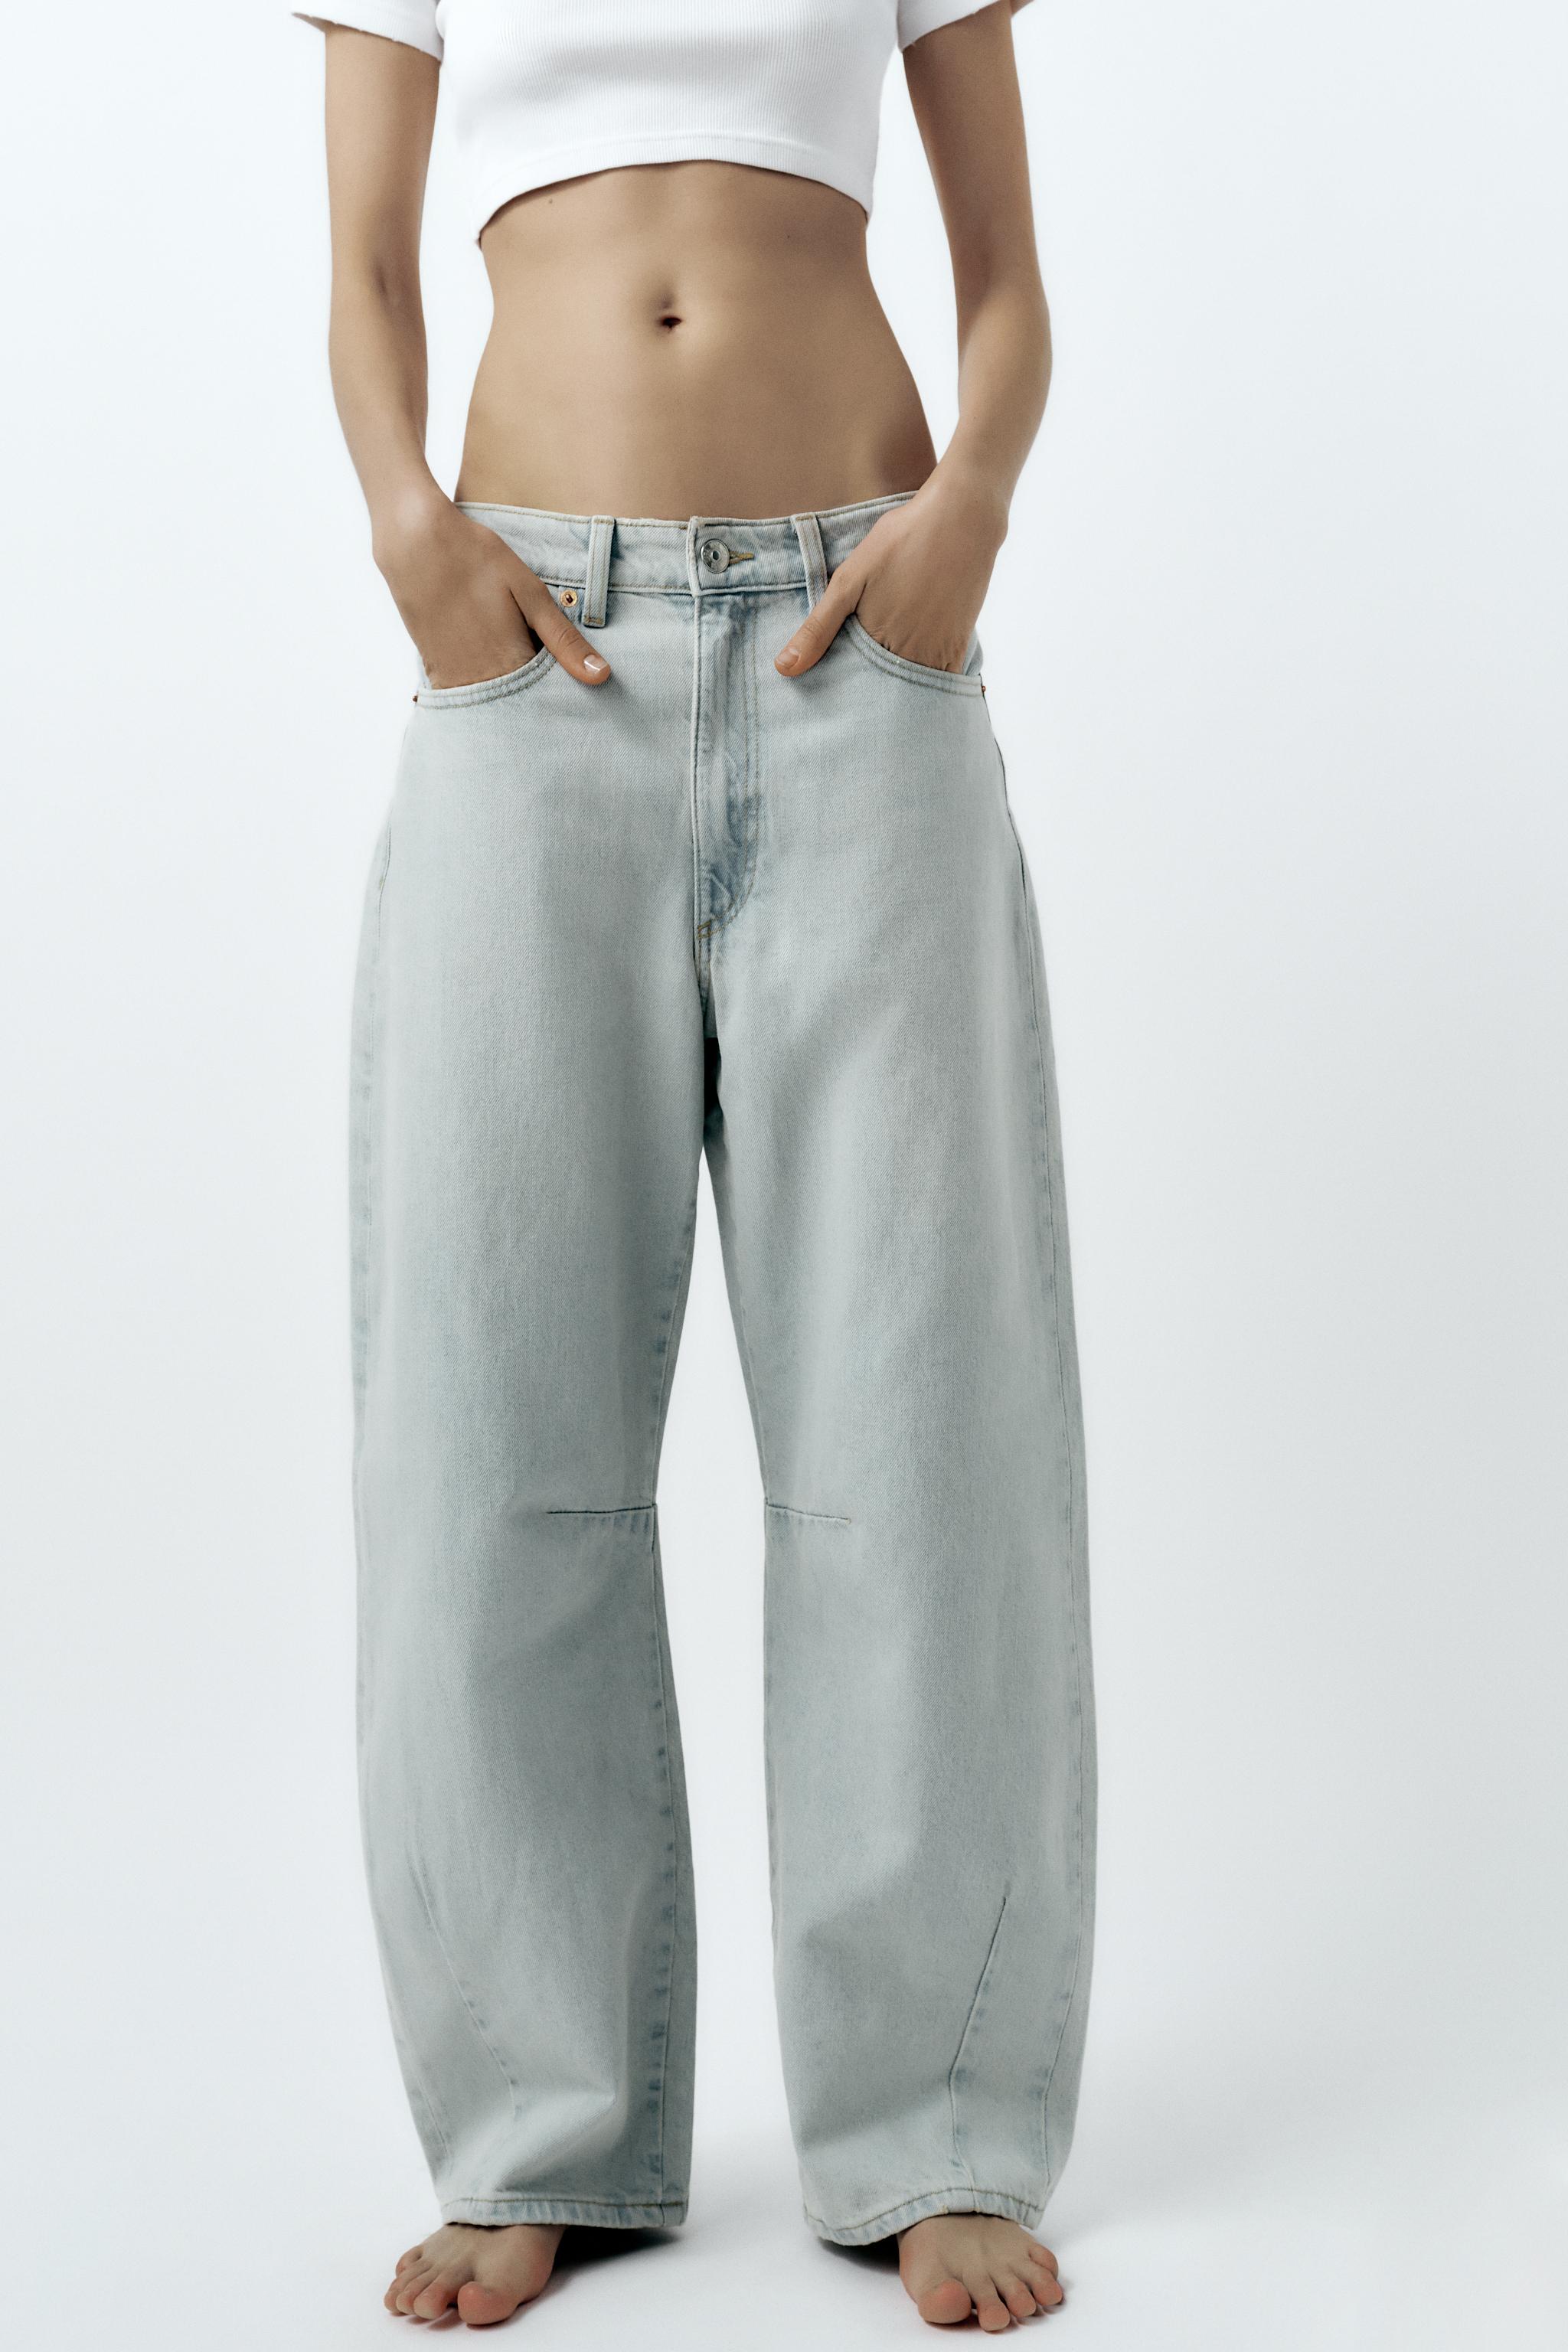 Kaia x Zara Baggy Jeans and Leather Crop Top